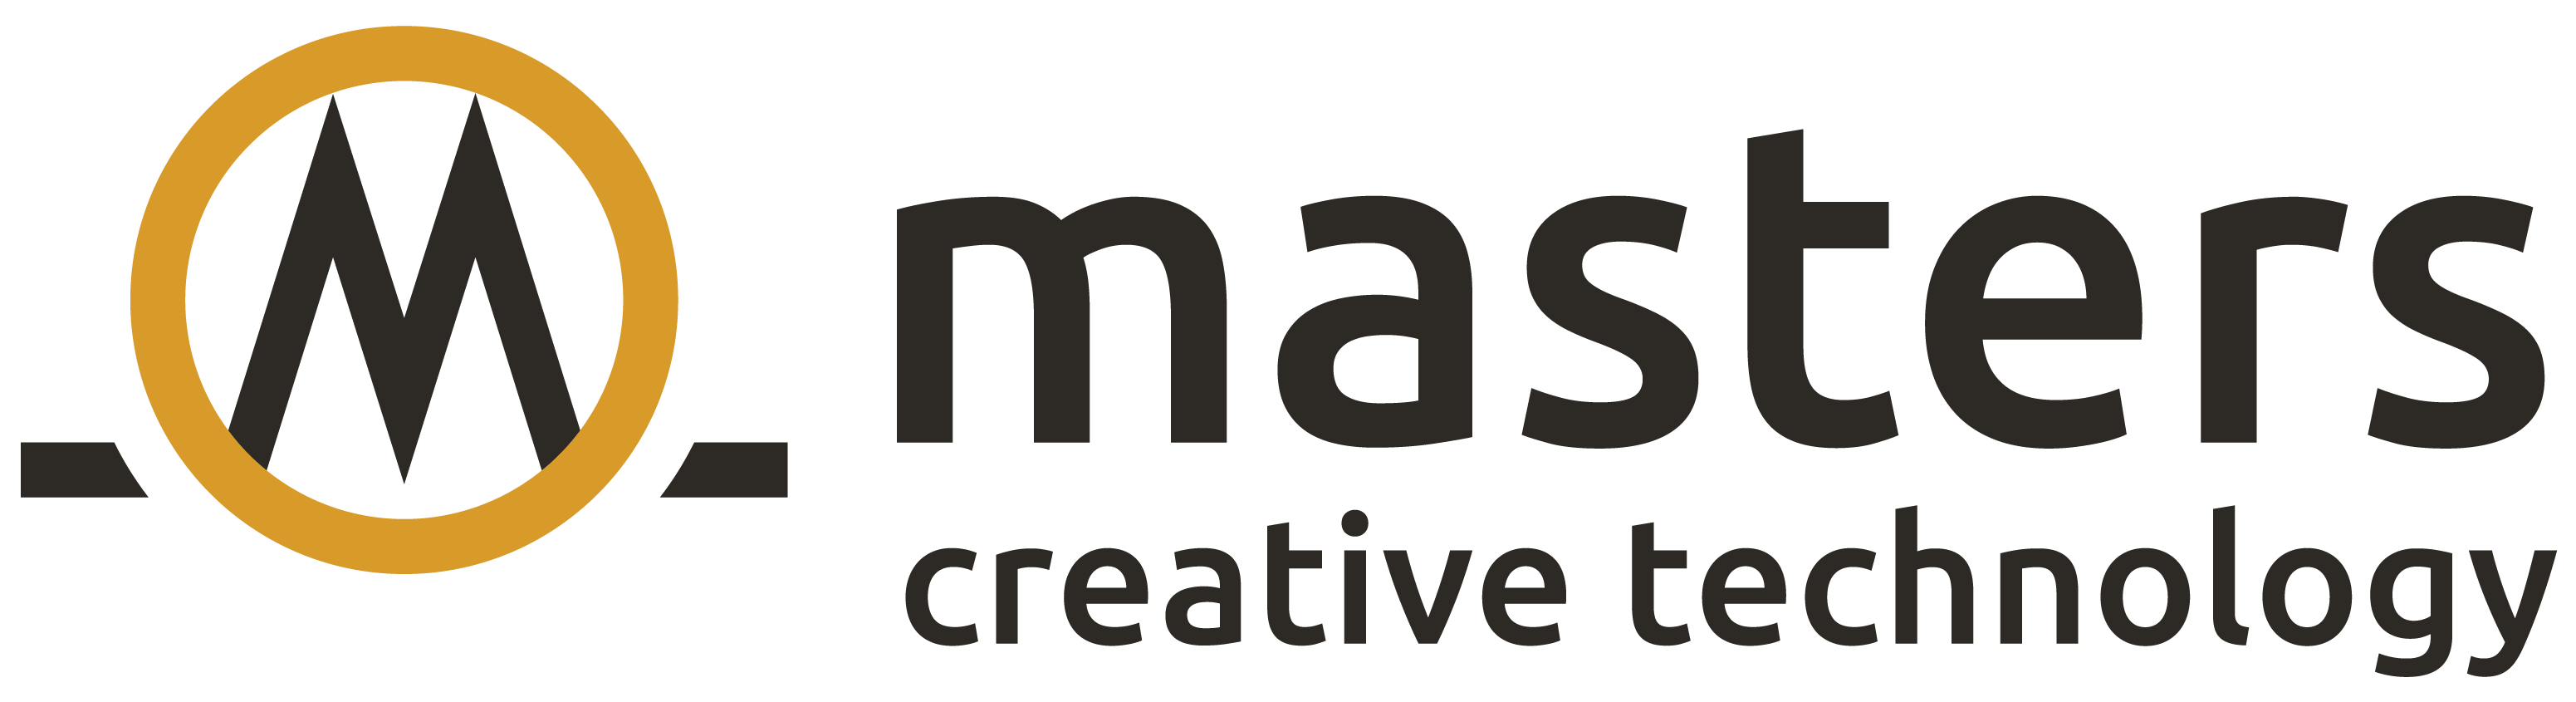 Masters creative technology